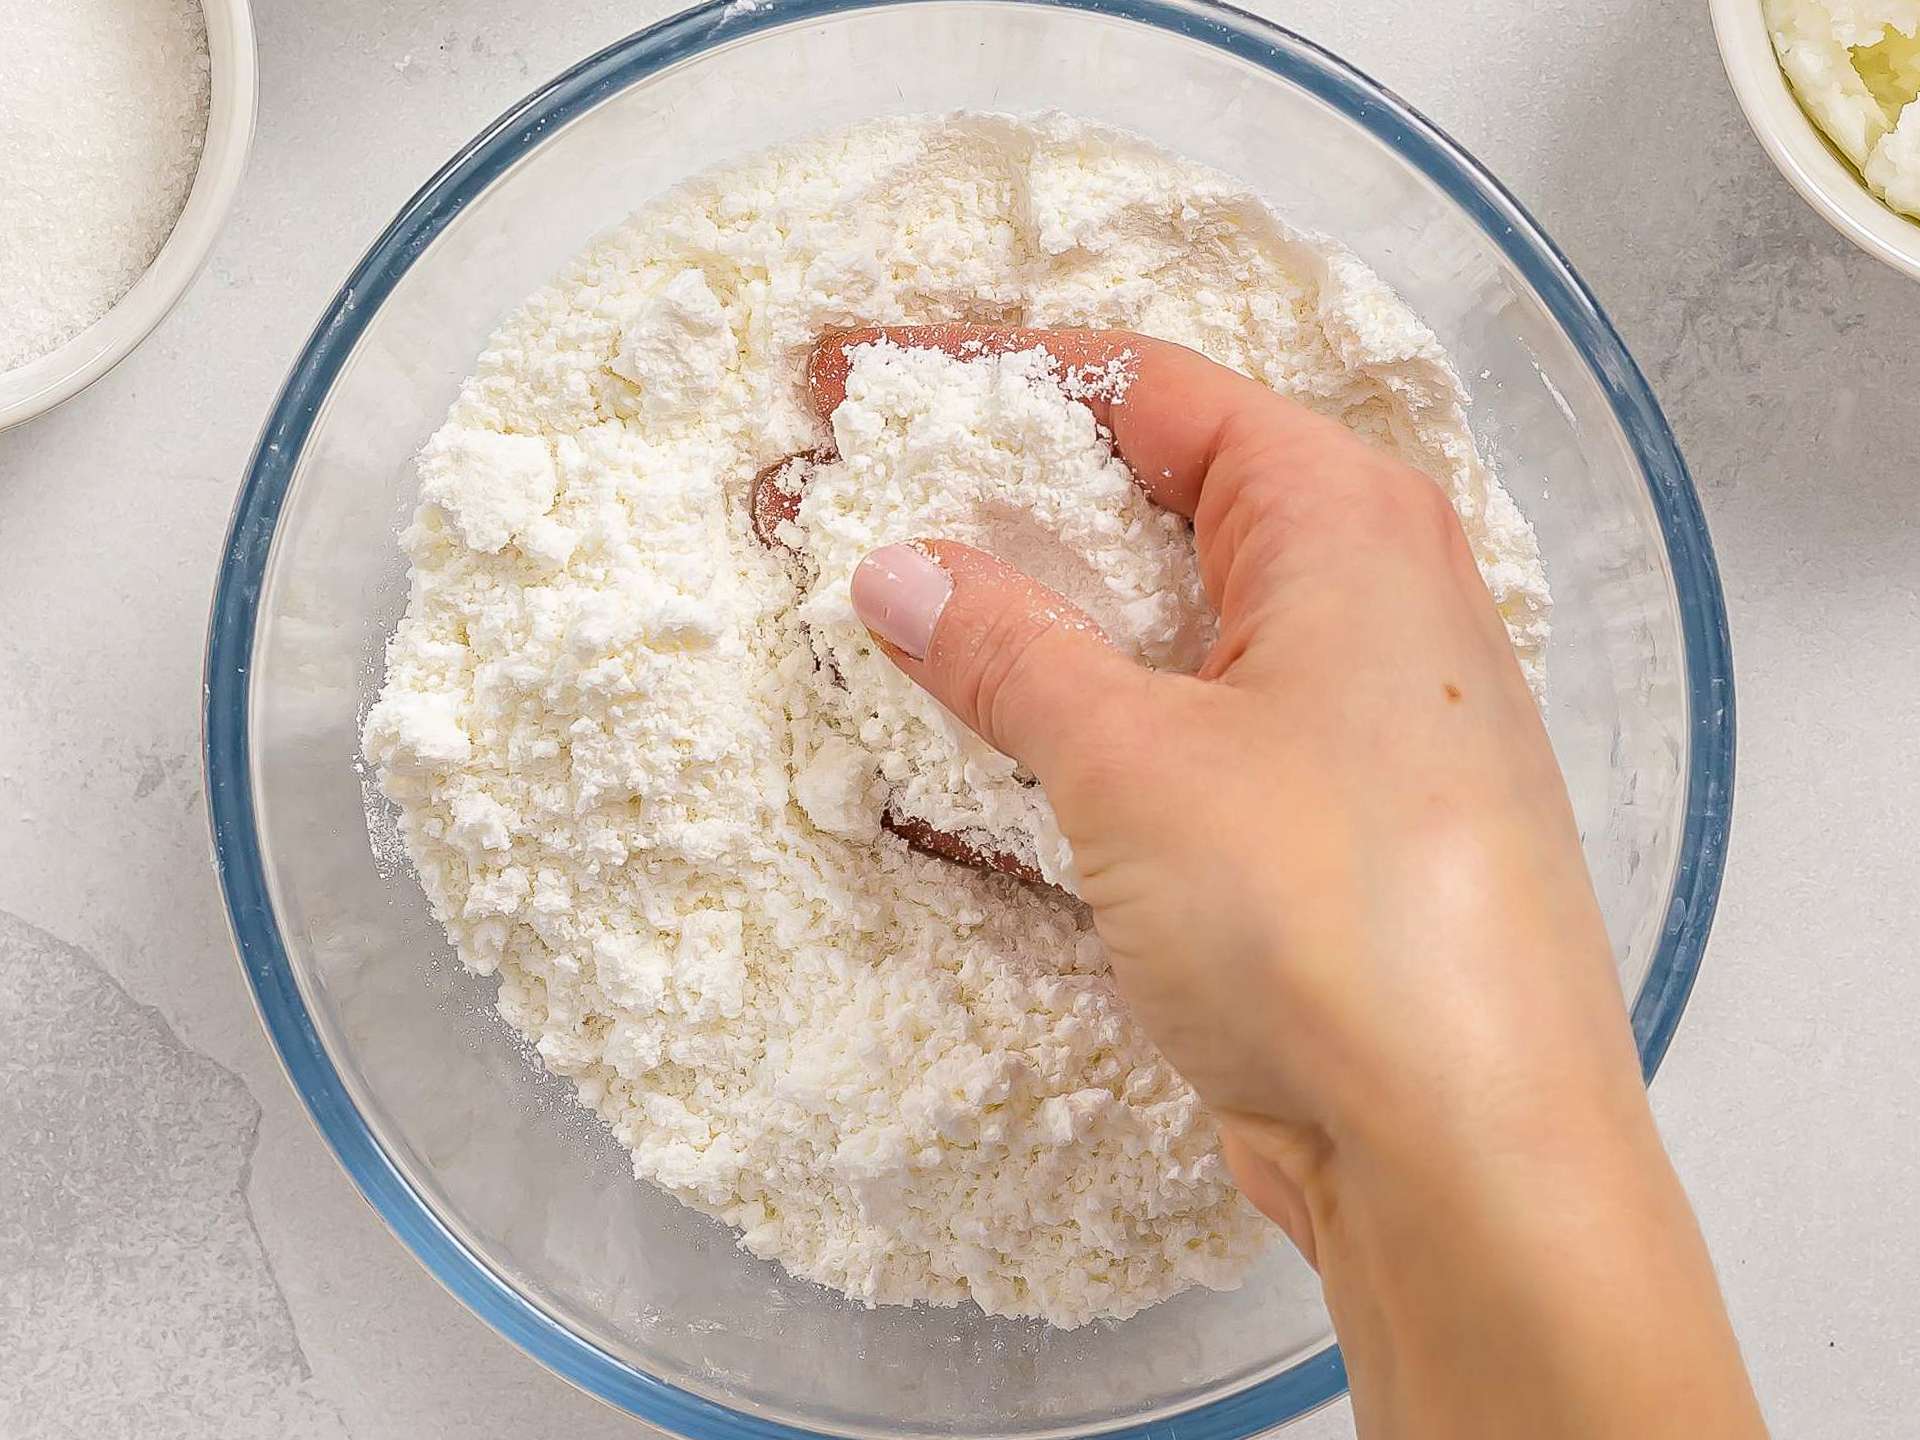 Mochi Flour vs Rice Flour: What's the Difference? | Foodaciously